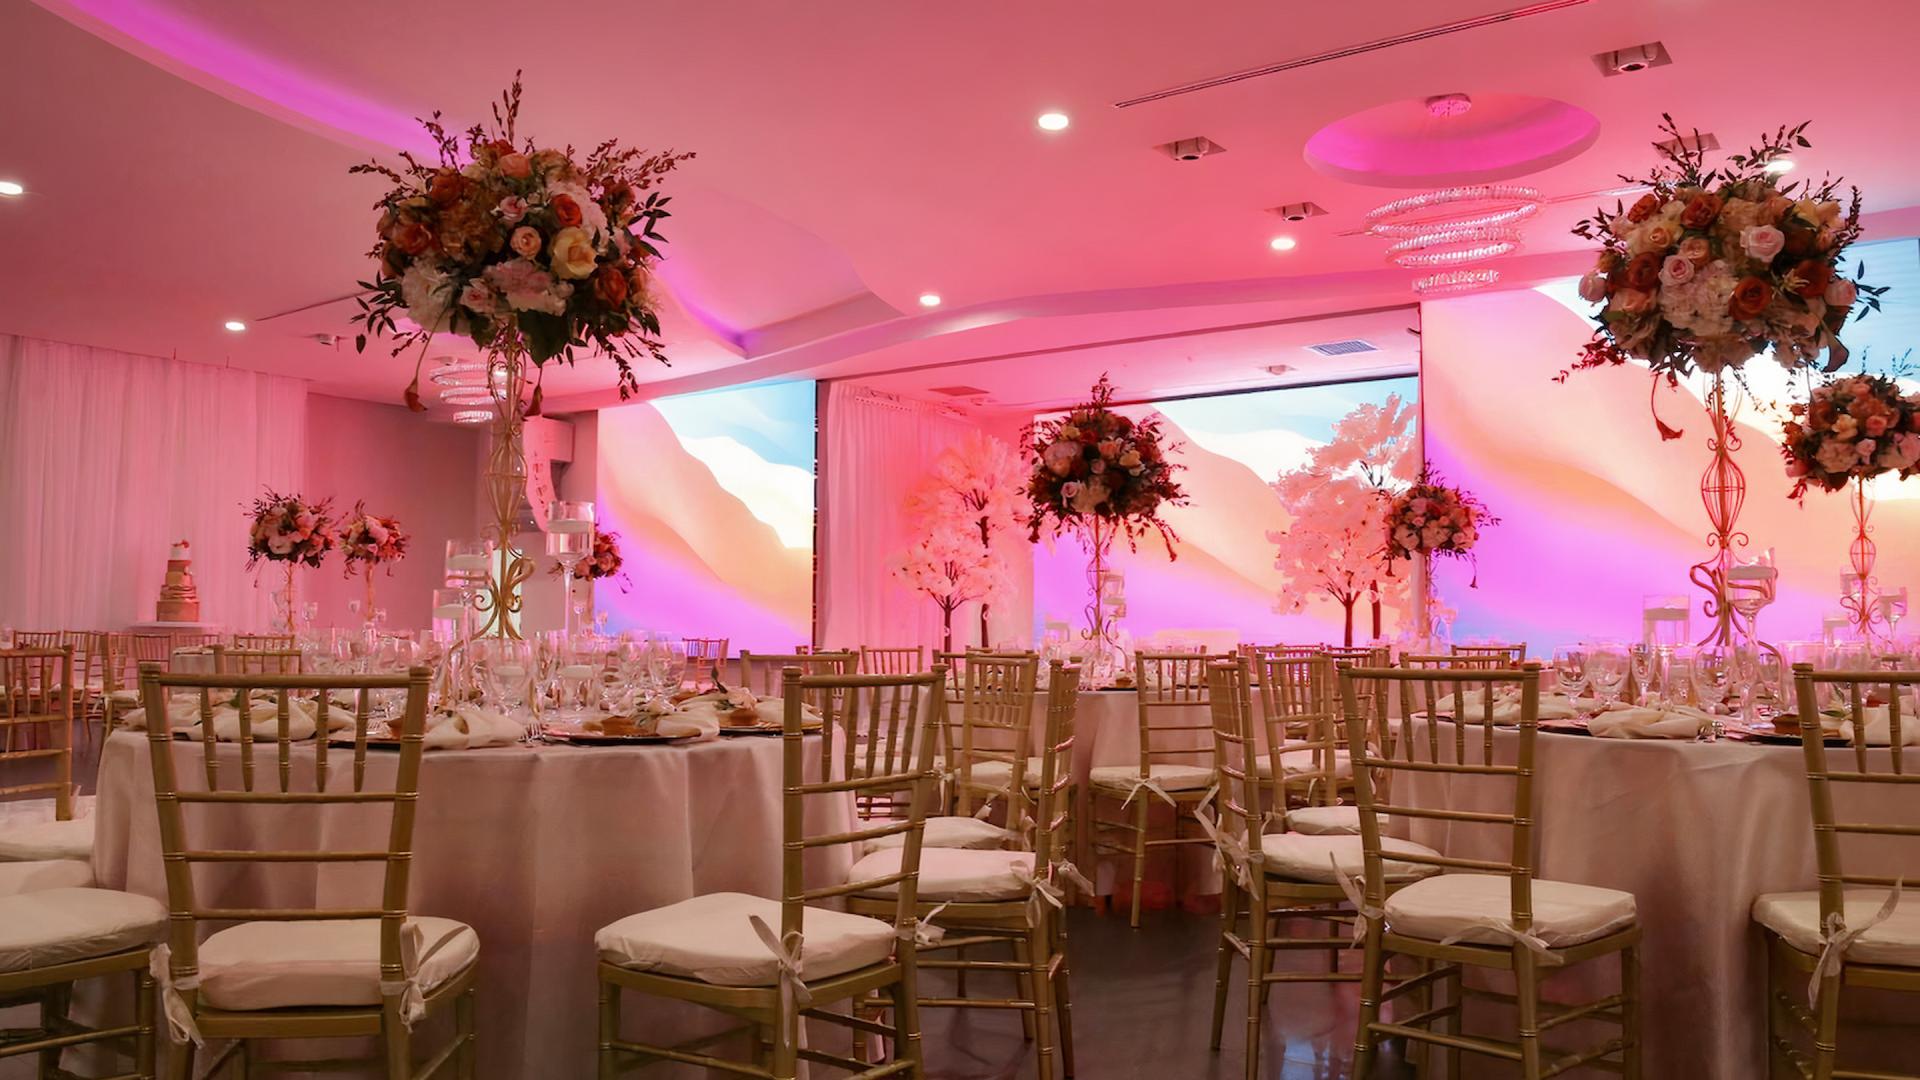 Affordable Wedding Venues for Rent in Miami, FL